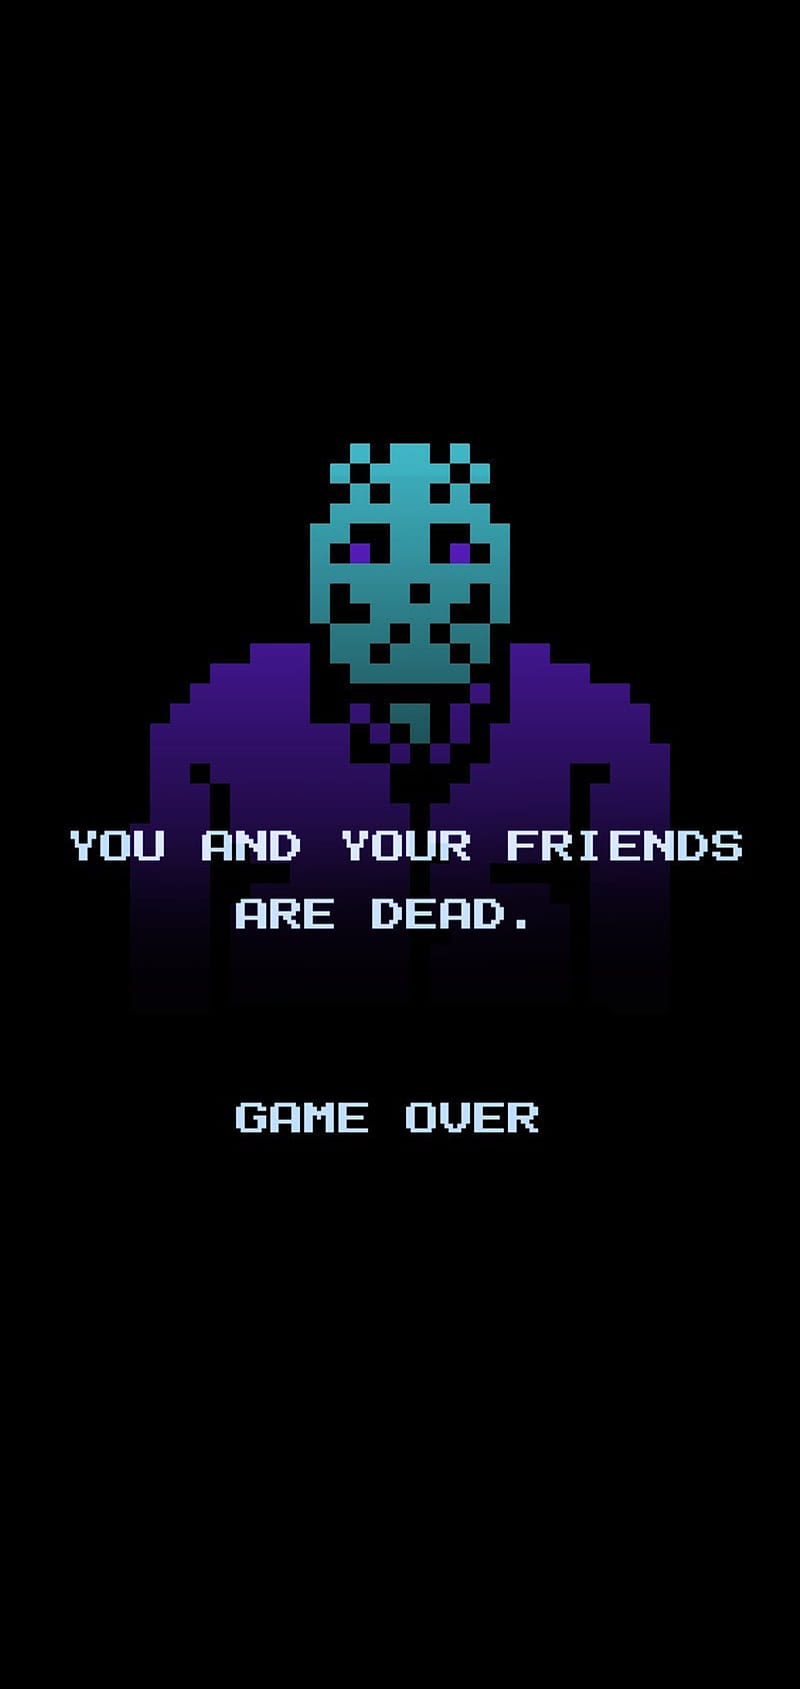 F13 NES, 13th, 80s, friday, game over, horror, jason voorhees, nintendo, the, video games, HD phone wallpaper